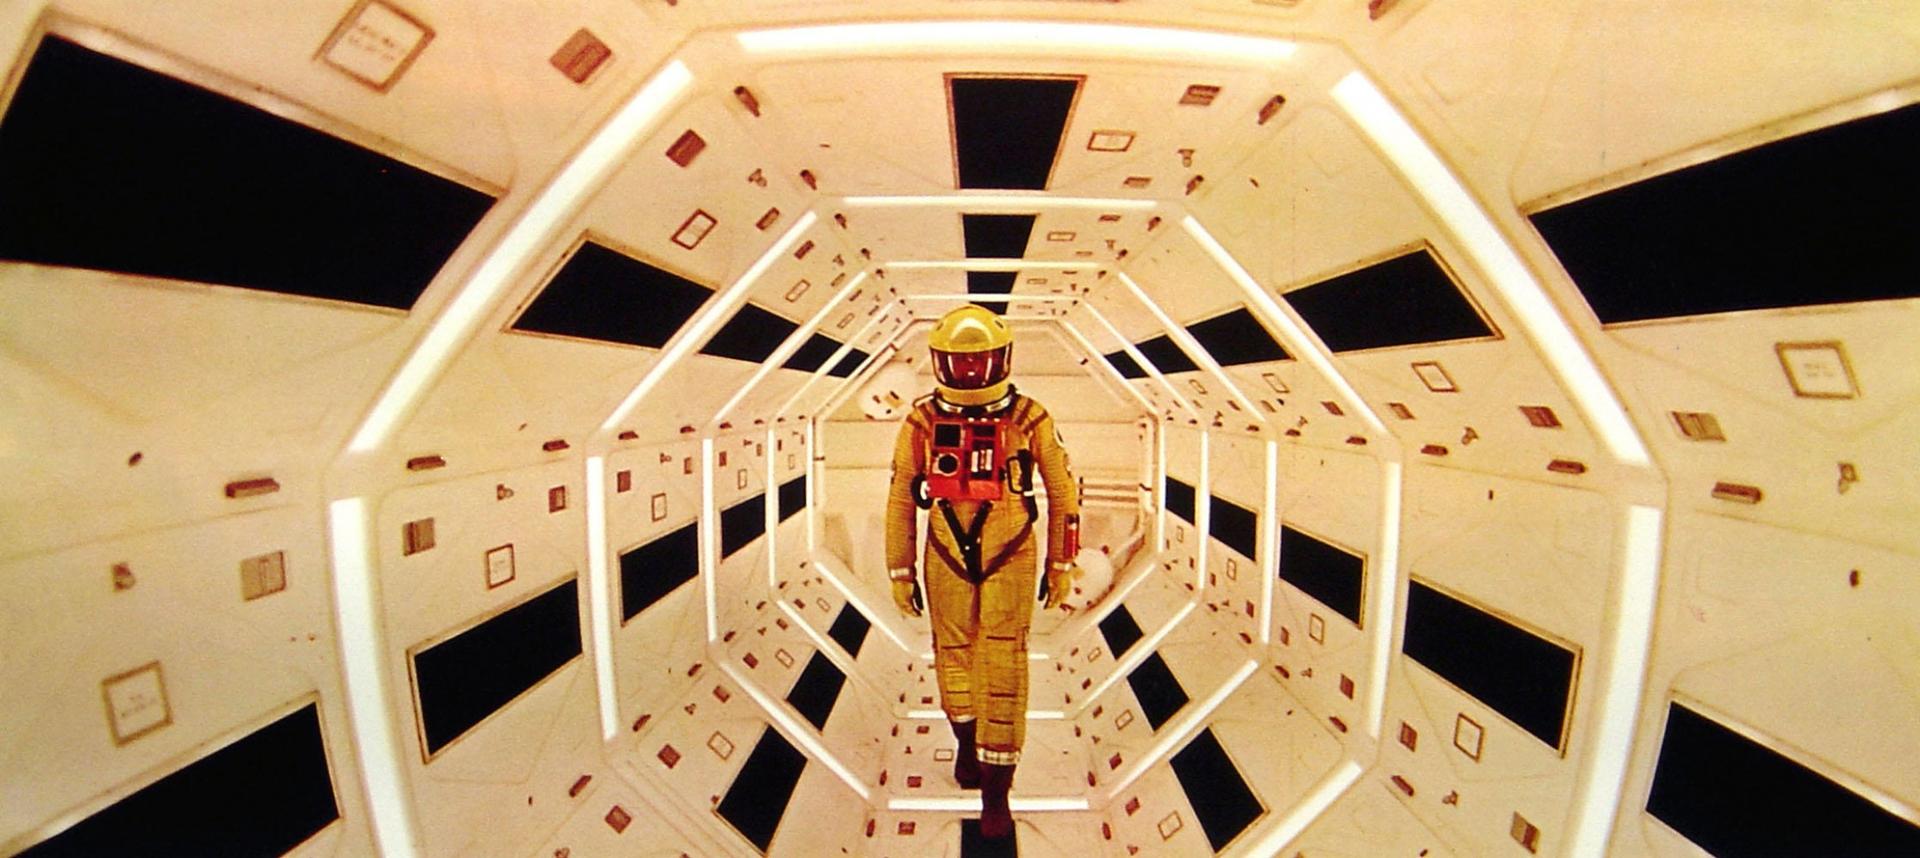 A still from “2001: A Space Odyssey.”